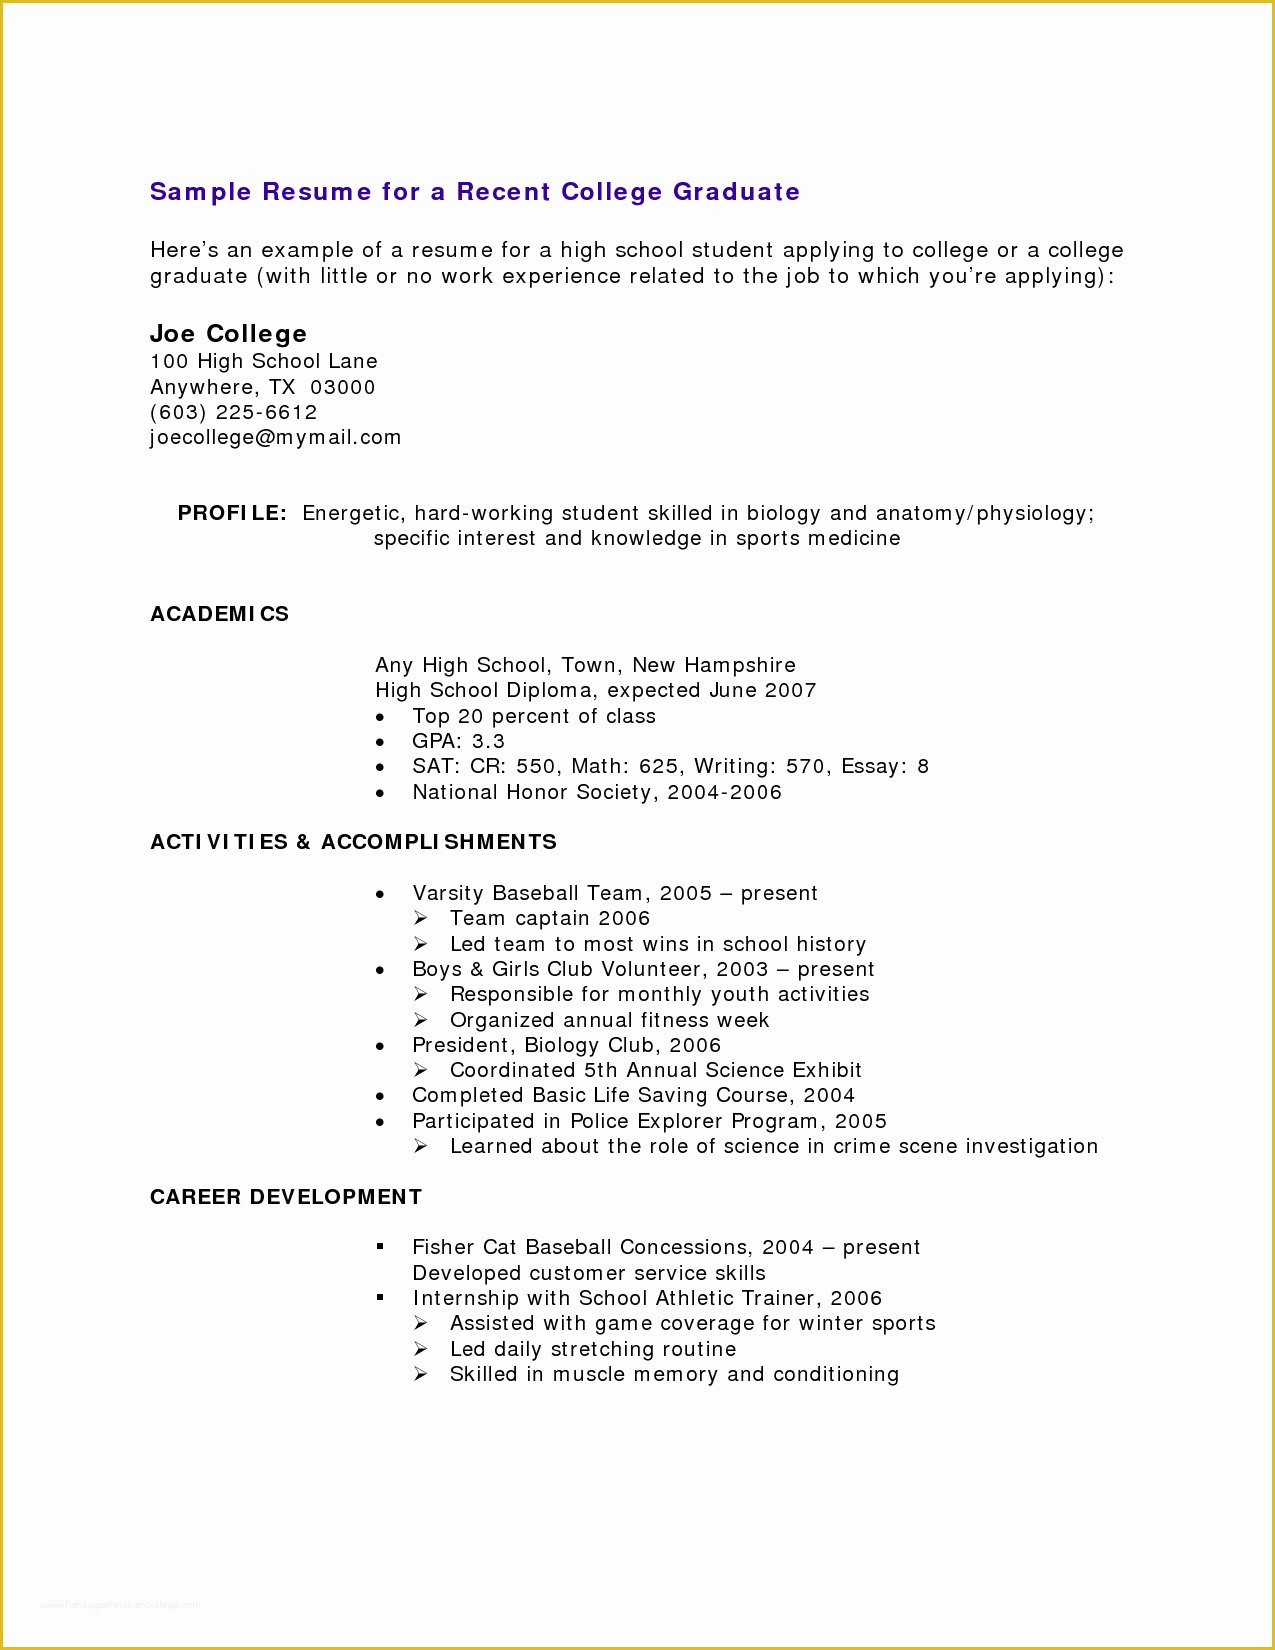 Free Resume Templates for Highschool Students with No Work Experience Of Resumes Templates for Students with No Experience